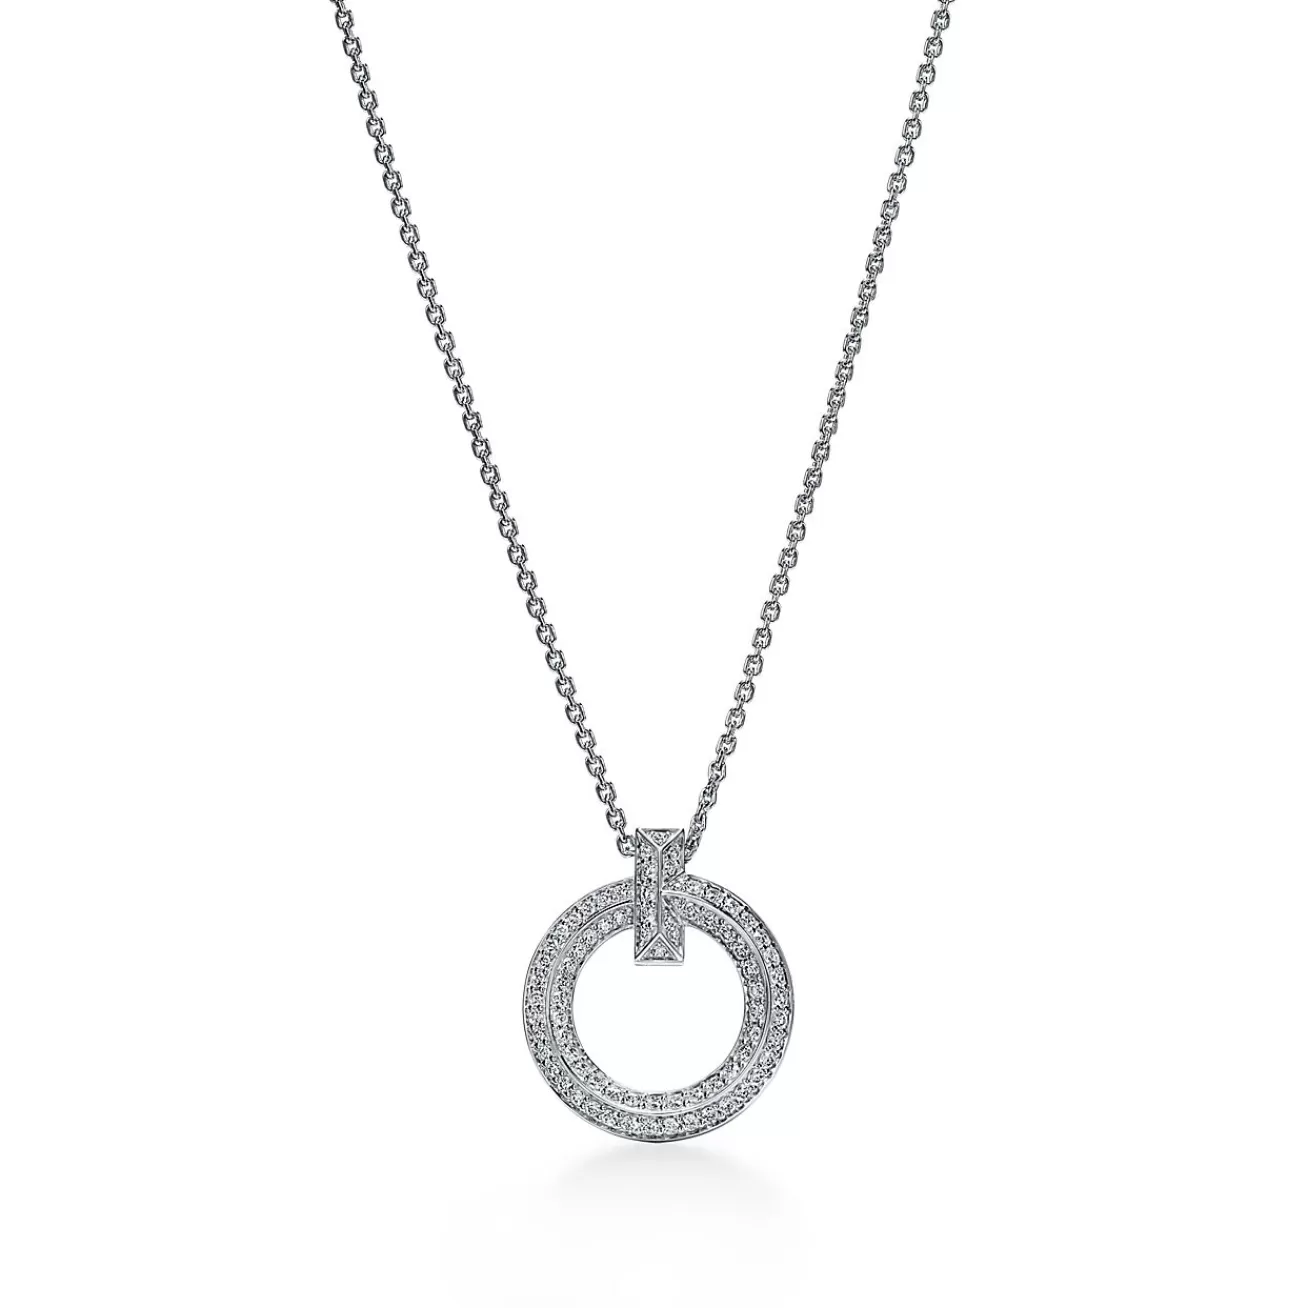 Tiffany & Co. Tiffany T T1 Circle Pendant in White Gold with Pavé Diamonds | ^ Necklaces & Pendants | Gifts for Her